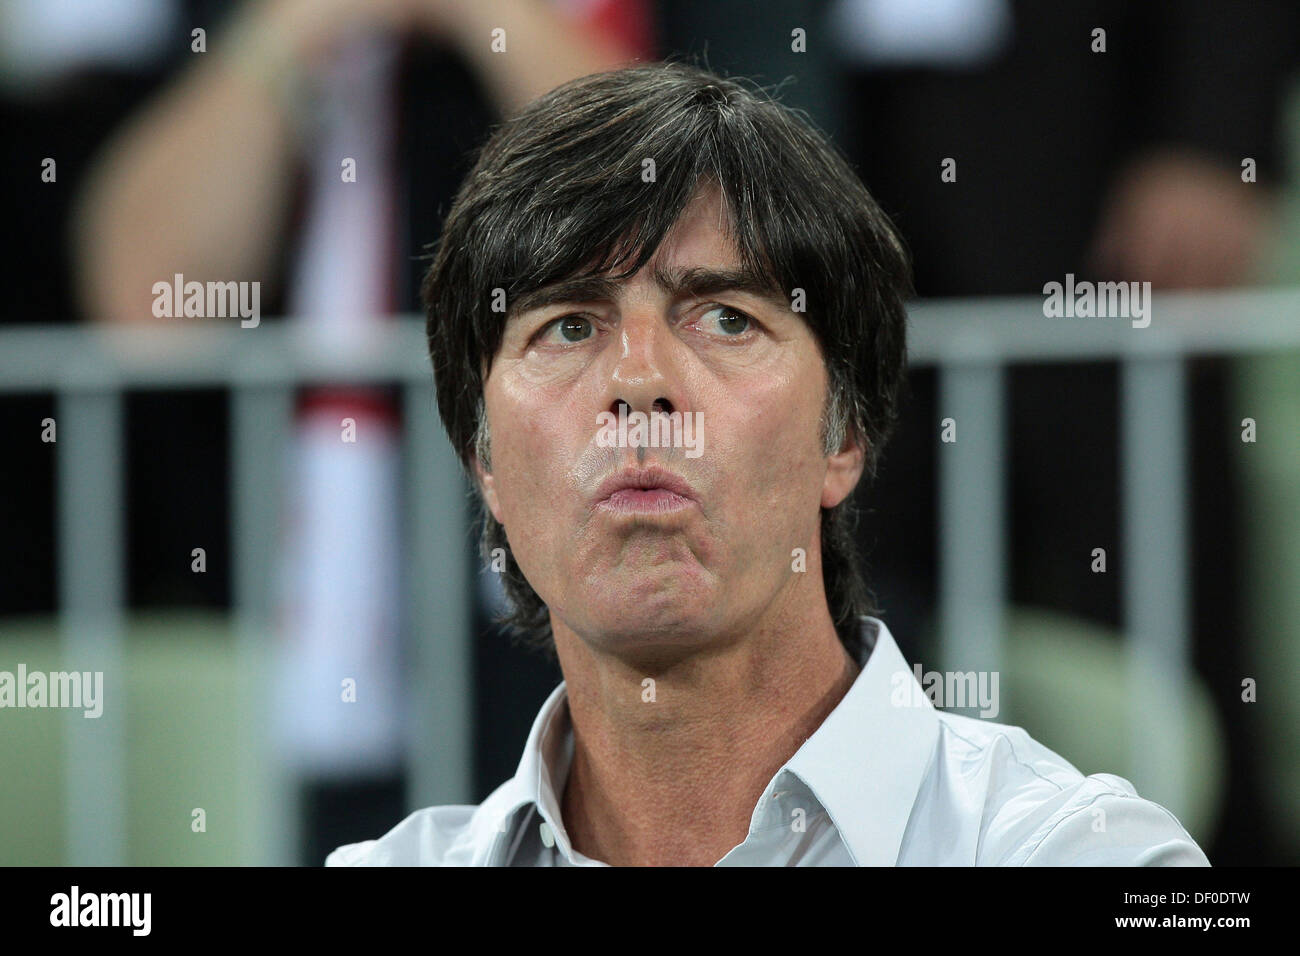 Joachim Loew, portrait, during the international match between Poland - Germany on 06.09.2011 in Gdansk, Poland, Europe Stock Photo